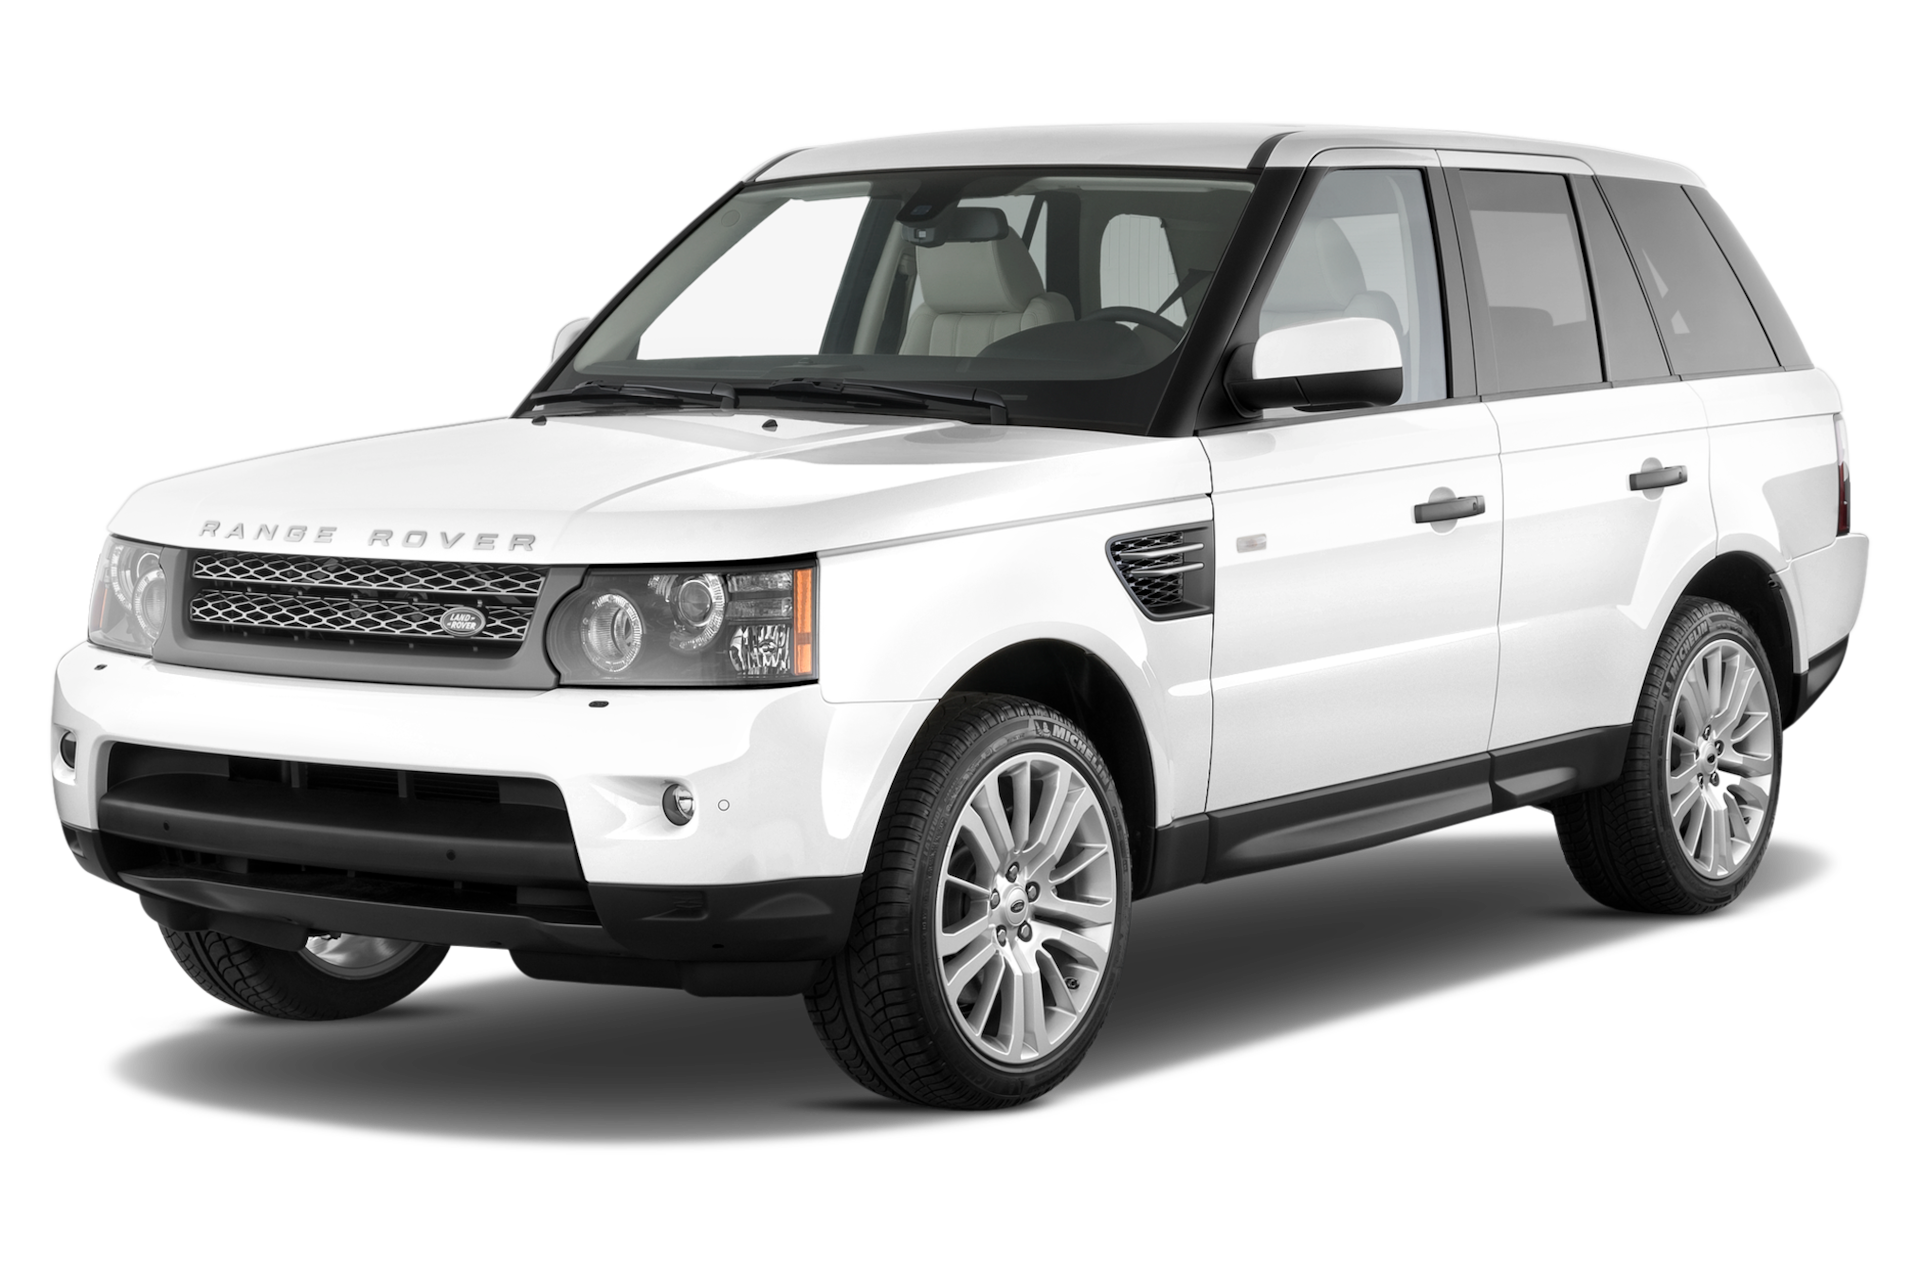 2010 Land Rover Range Rover Sport Prices, Reviews, and Photos - MotorTrend